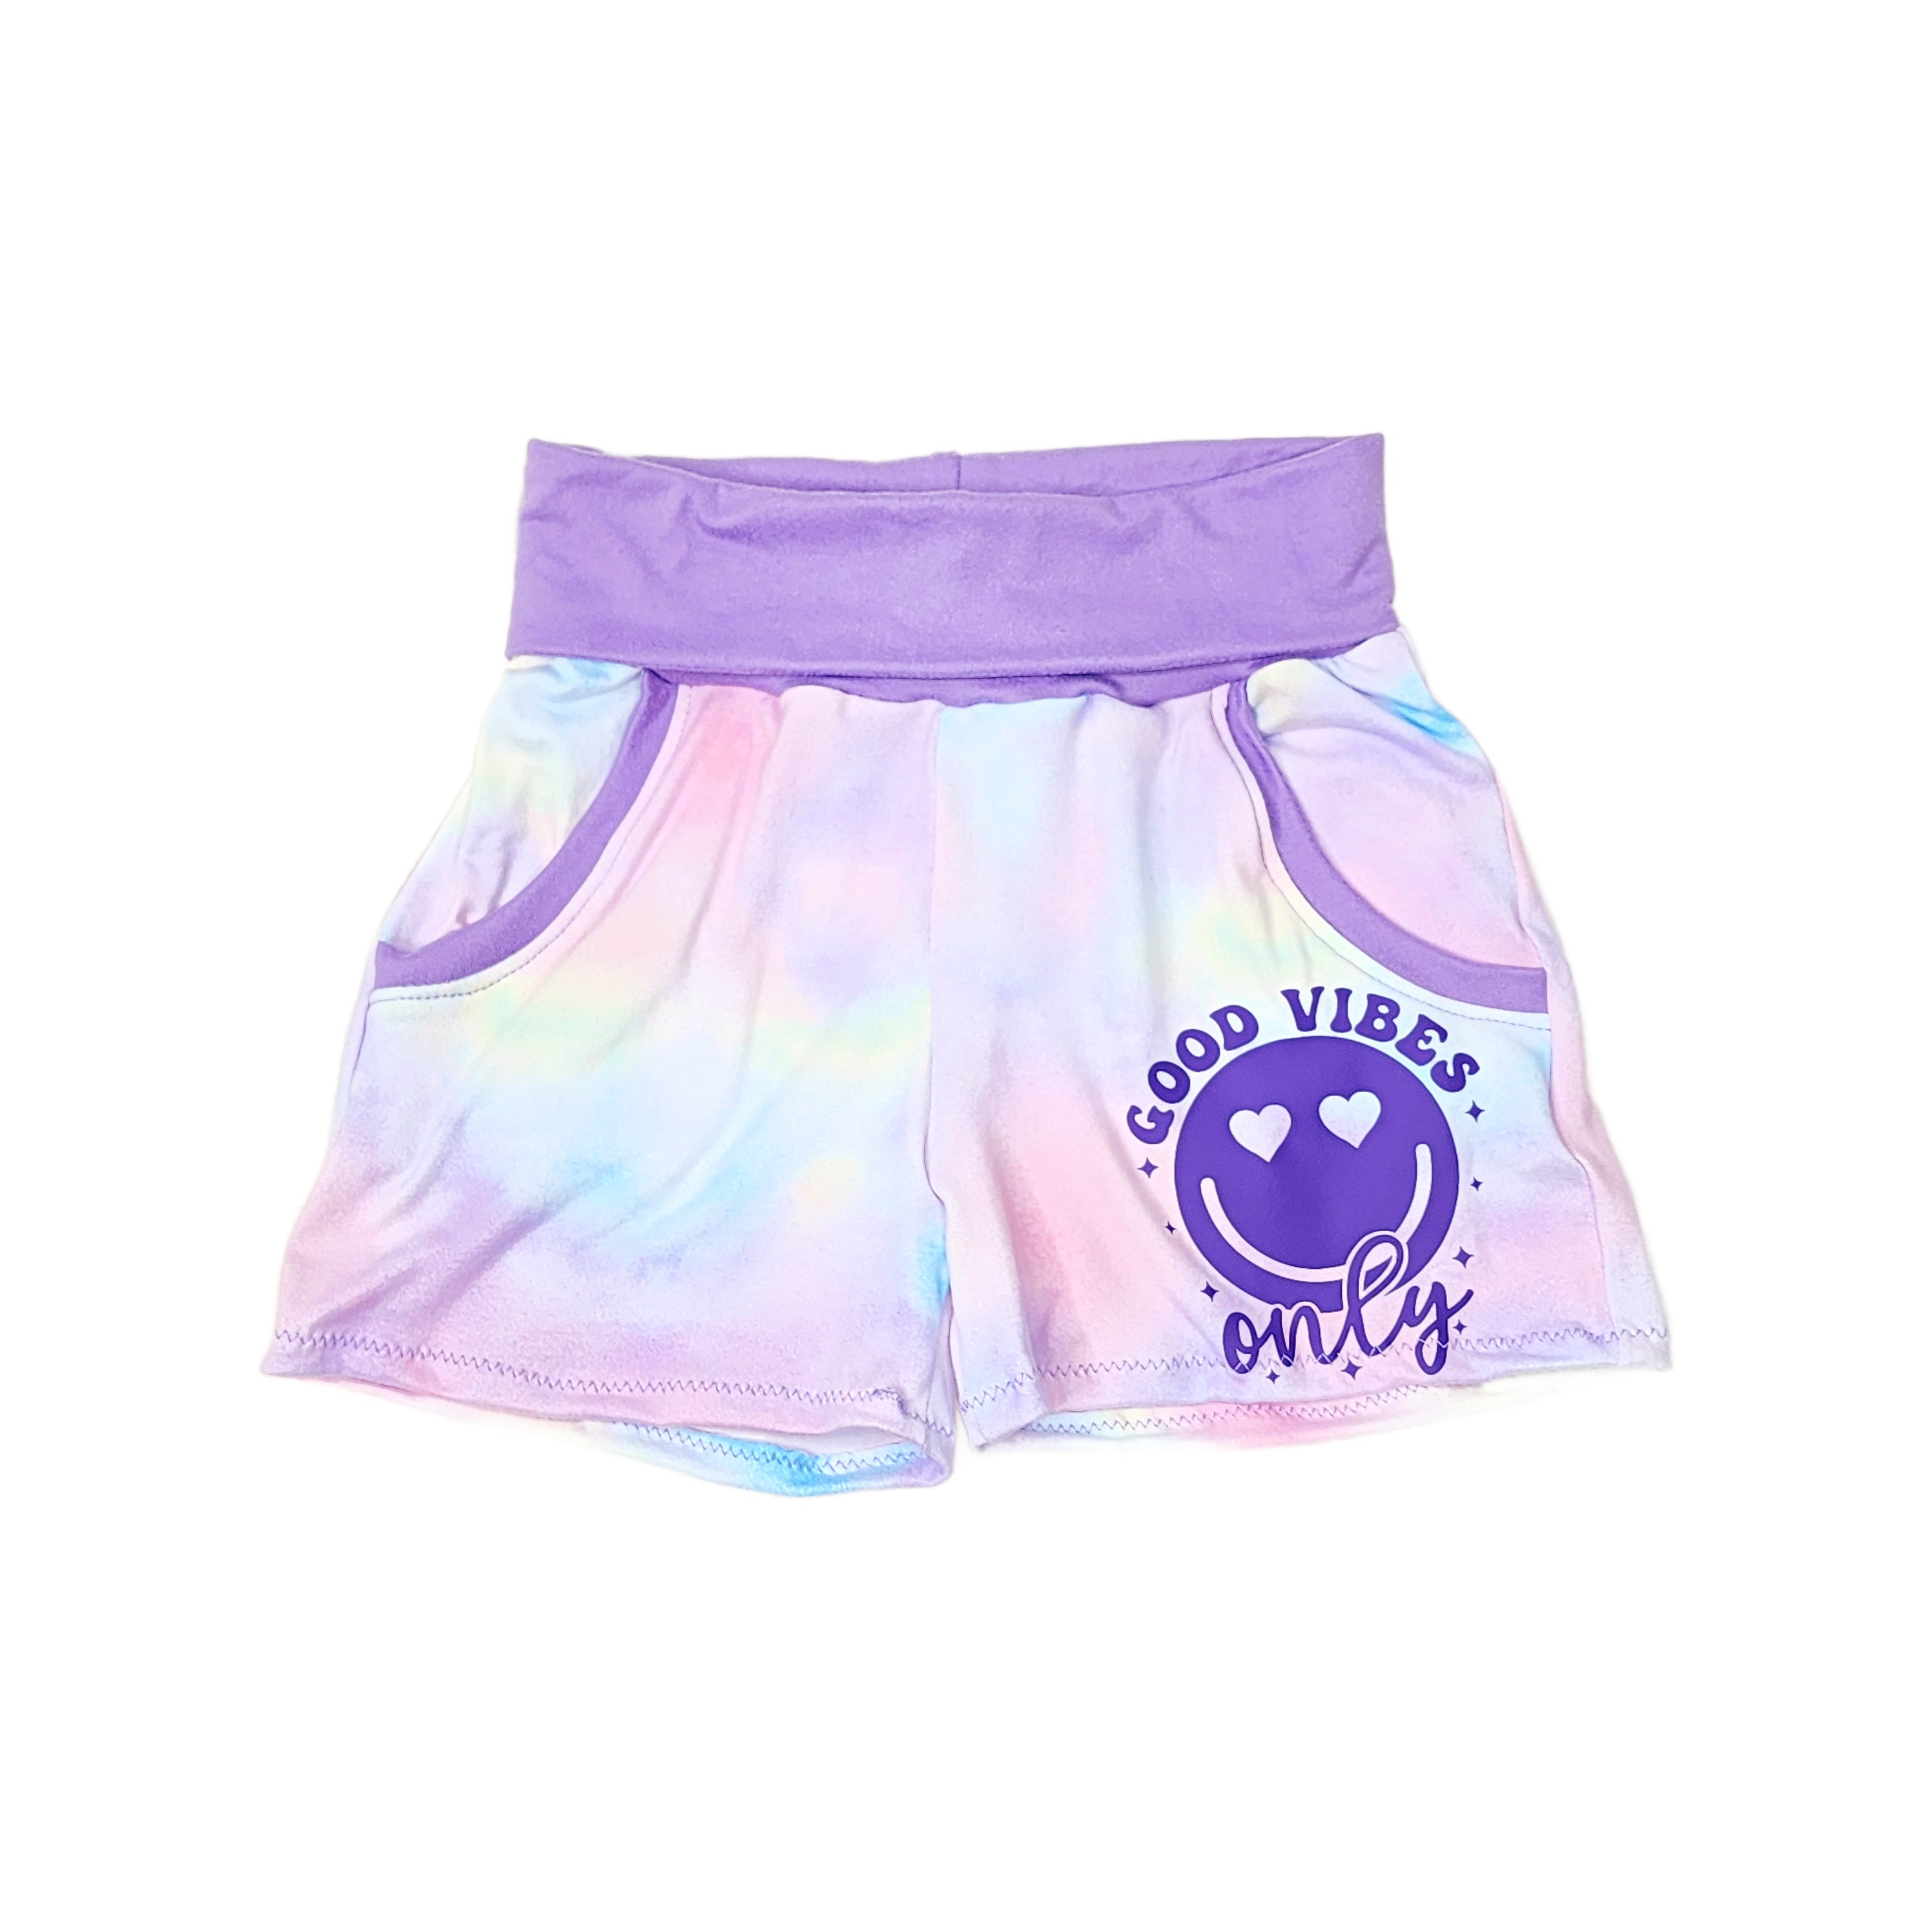 Good Vibes Only Graphic Shorts for Girls